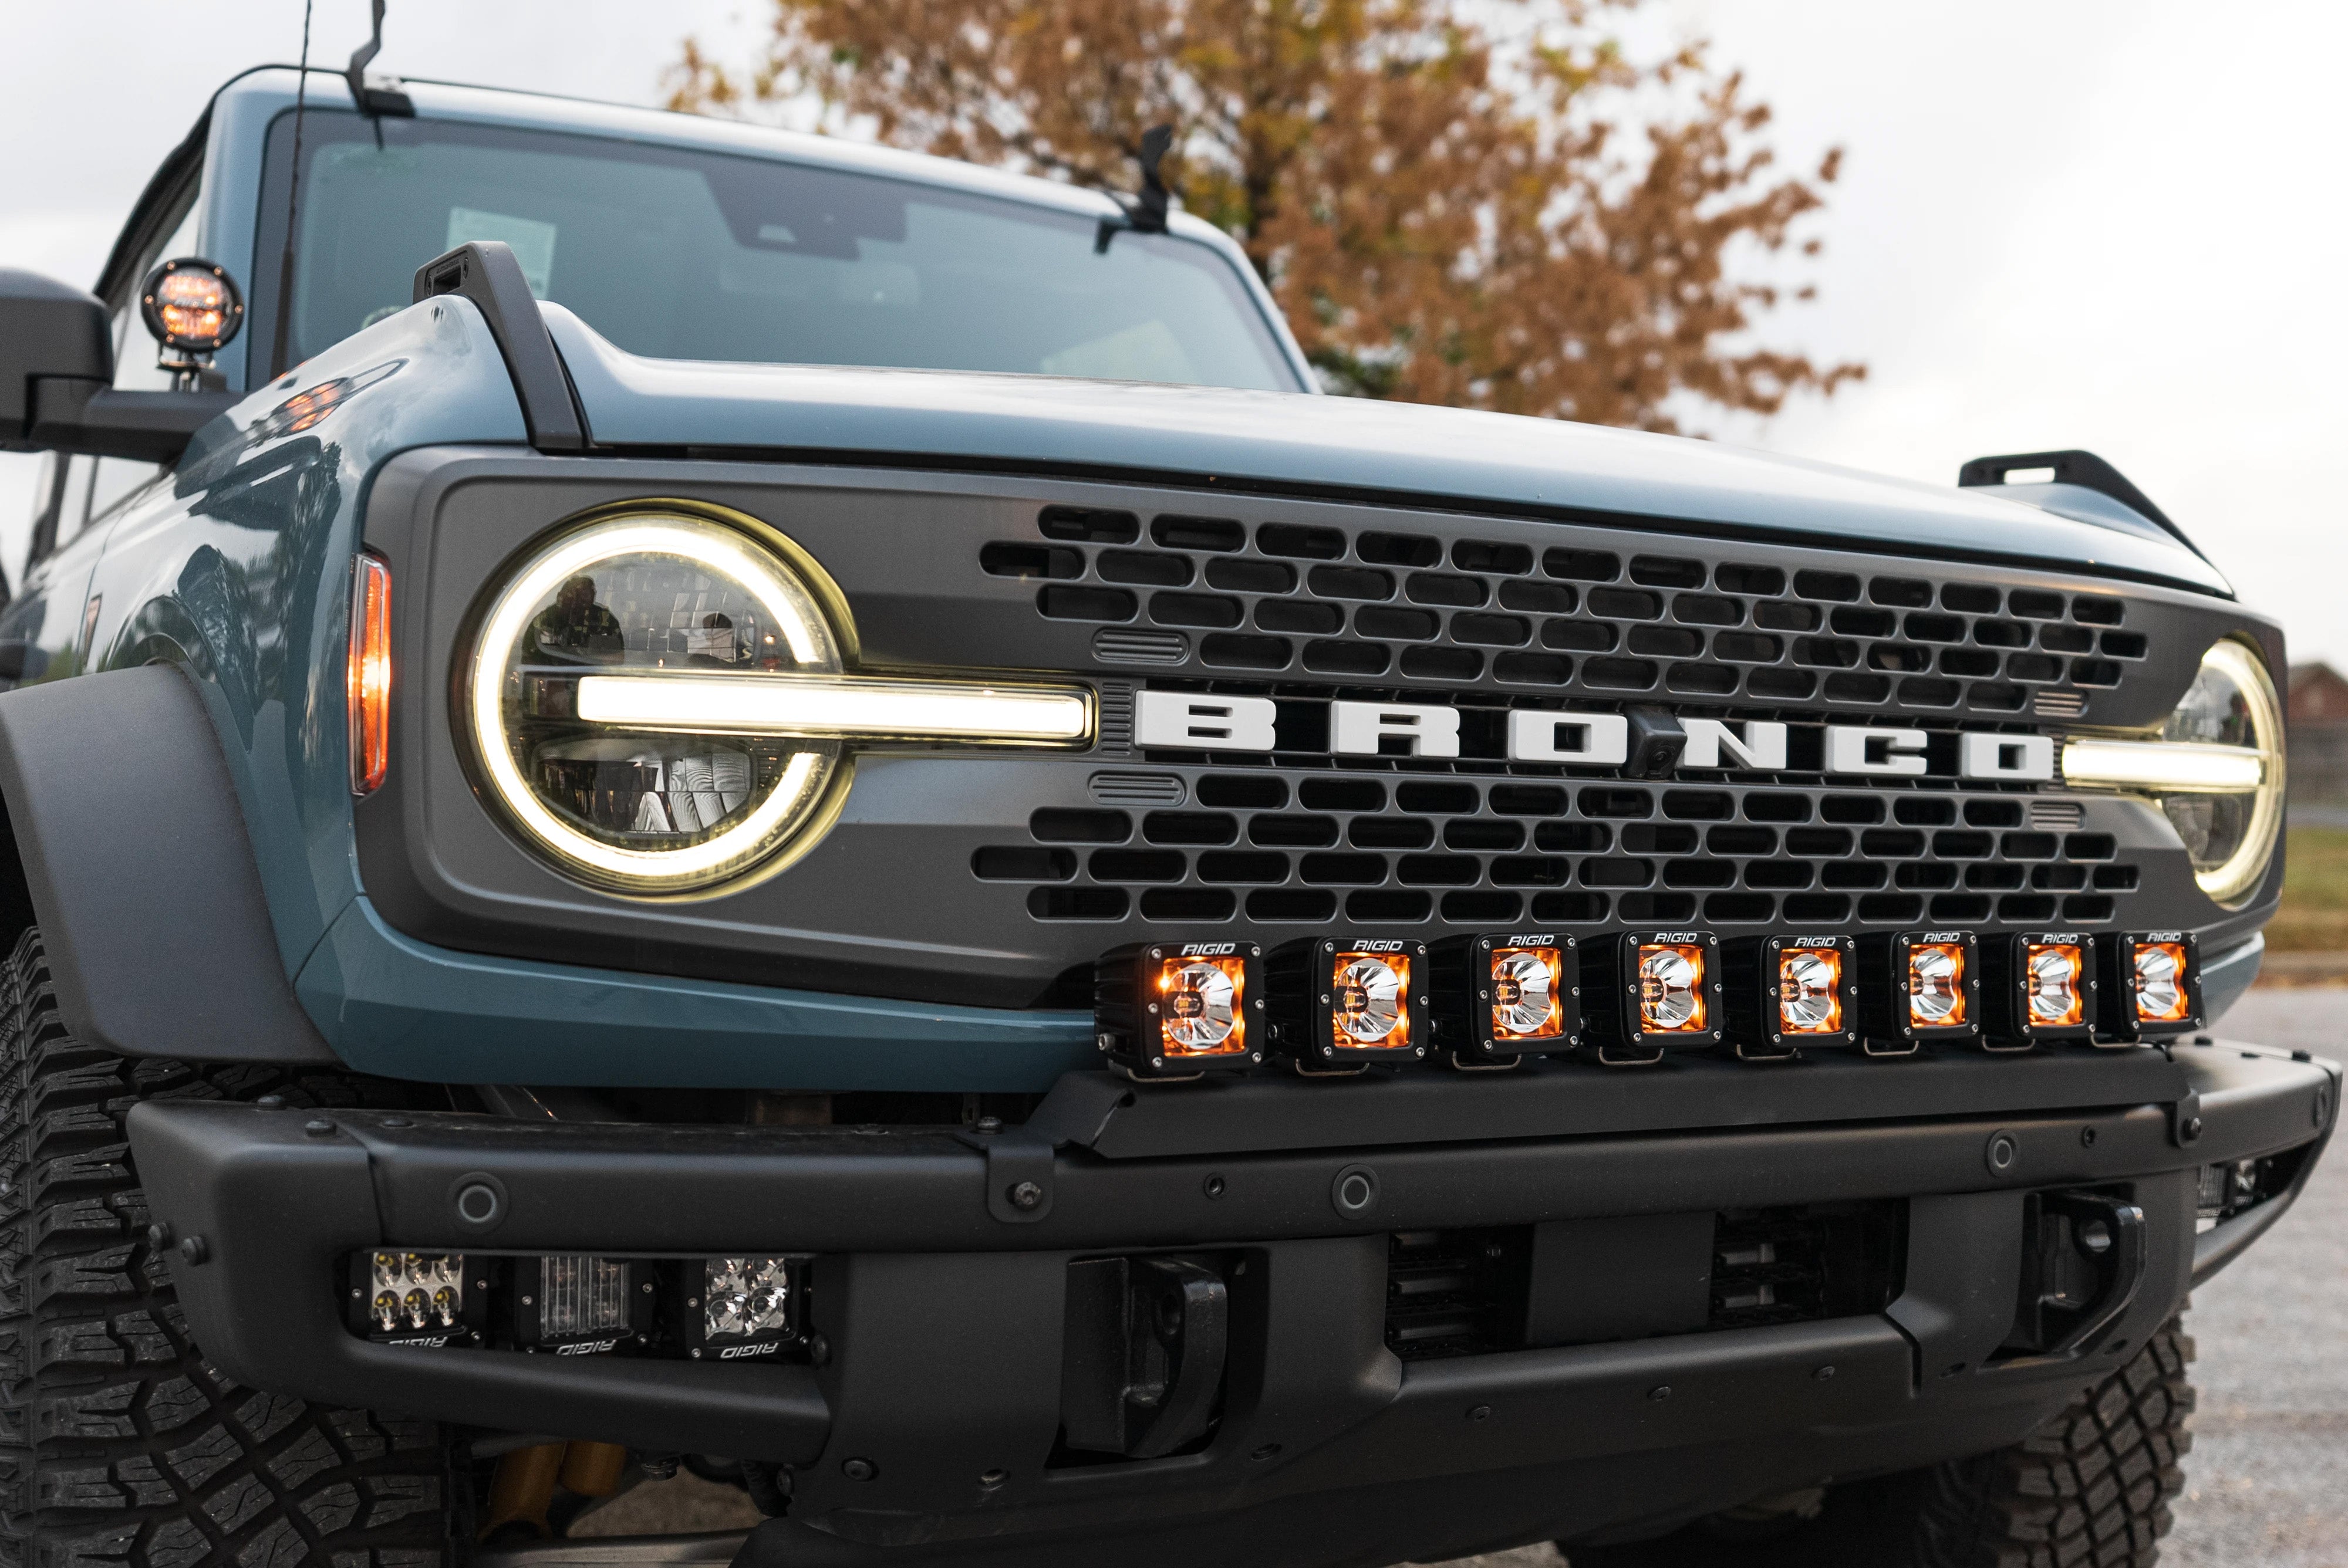 If you want the brightest light bar, or the best looking led light